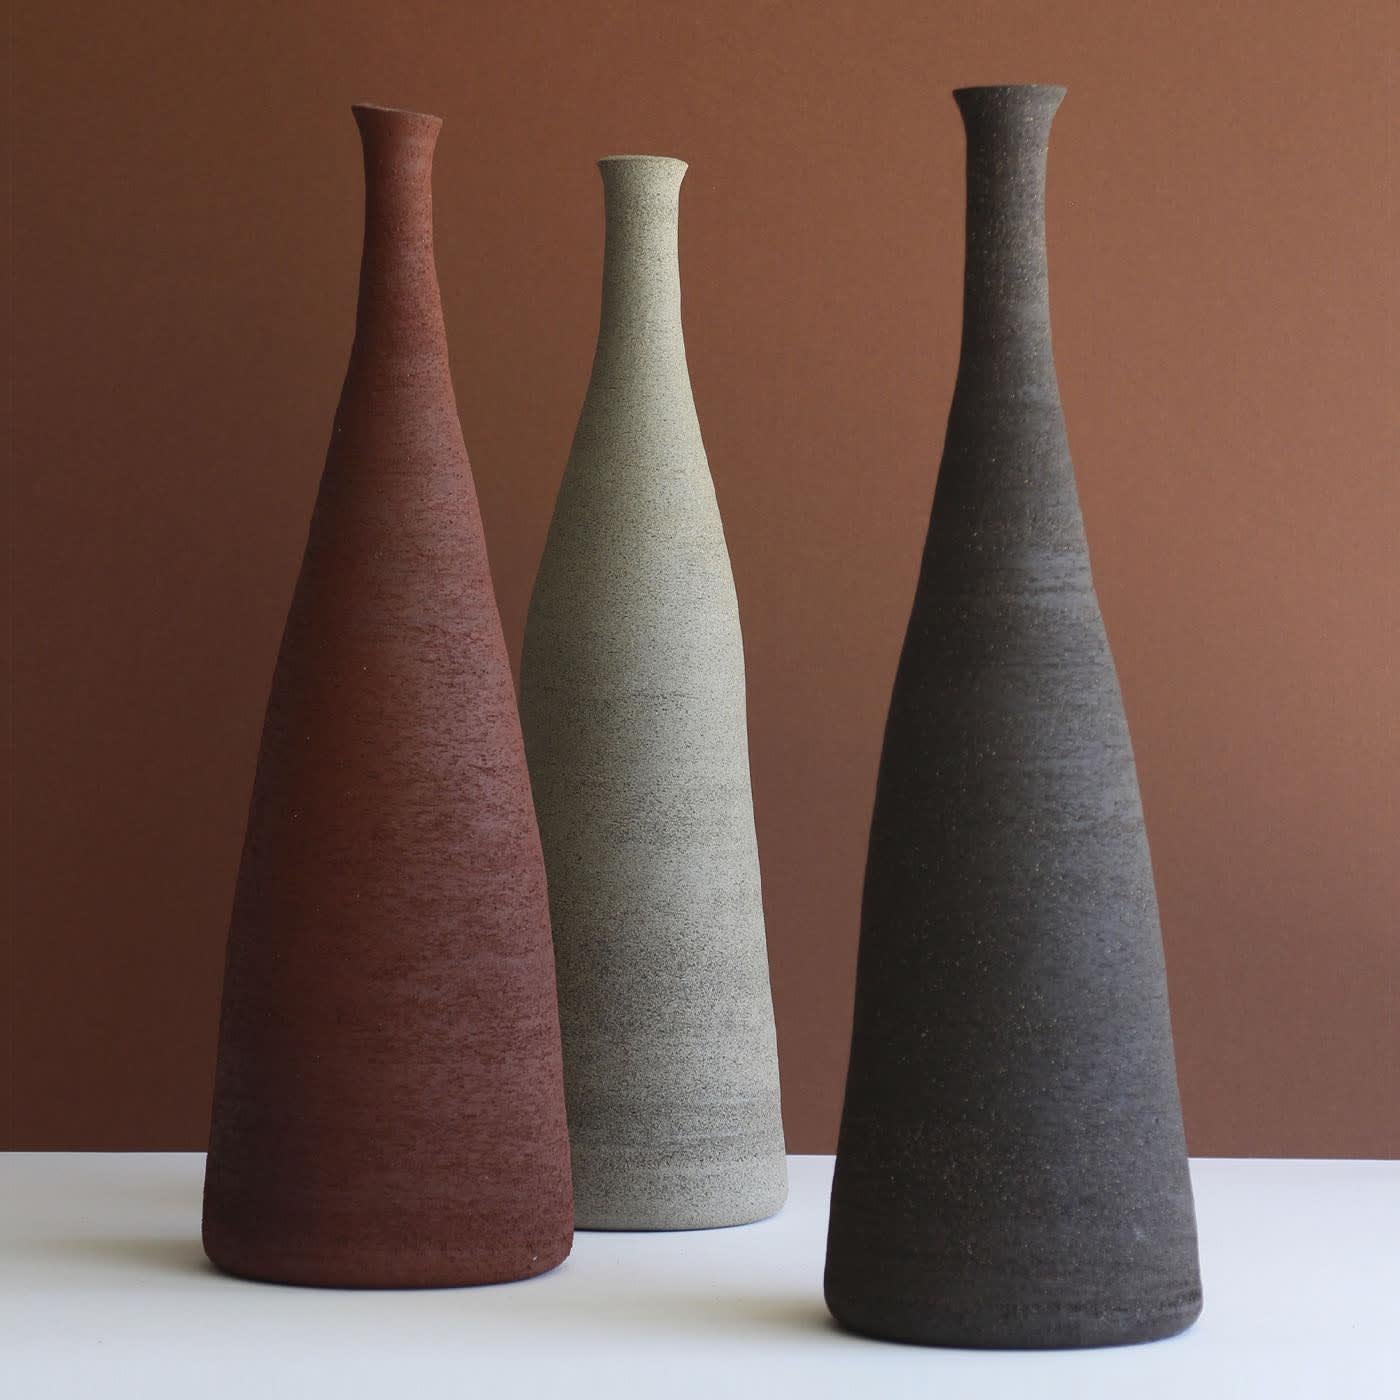 Harmonious lines define the elegant silhouette of this bottle-like decorative stoneware vase, a singular piece patiently crafted by hand and indeed unique. A scratched texture impeccably couples with the refined sand tone homogeneously extending